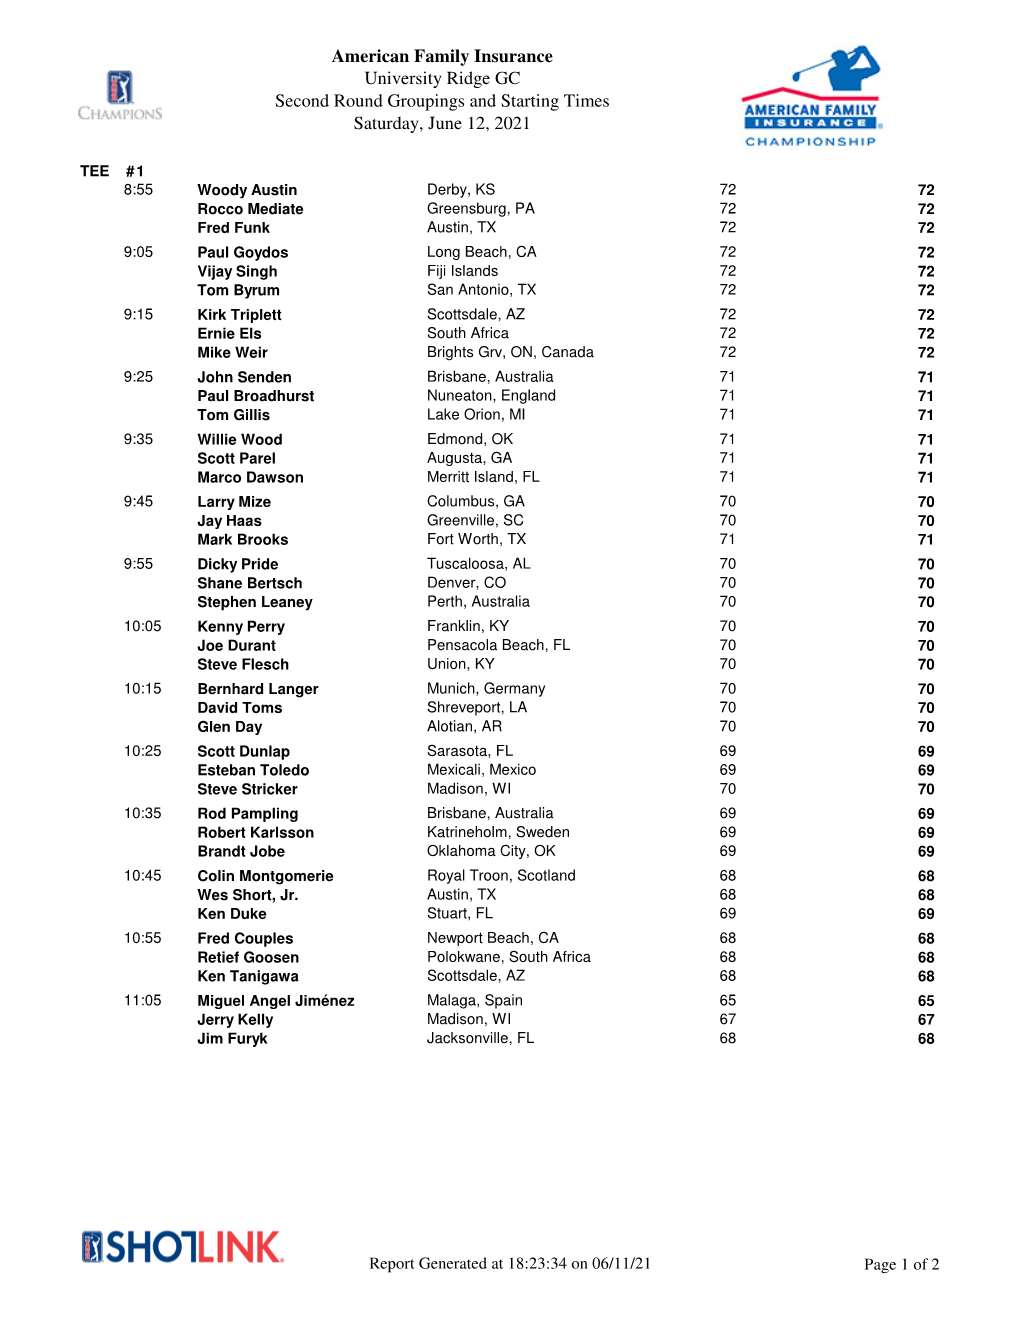 American Family Insurance University Ridge GC Second Round Groupings and Starting Times Saturday, June 12, 2021